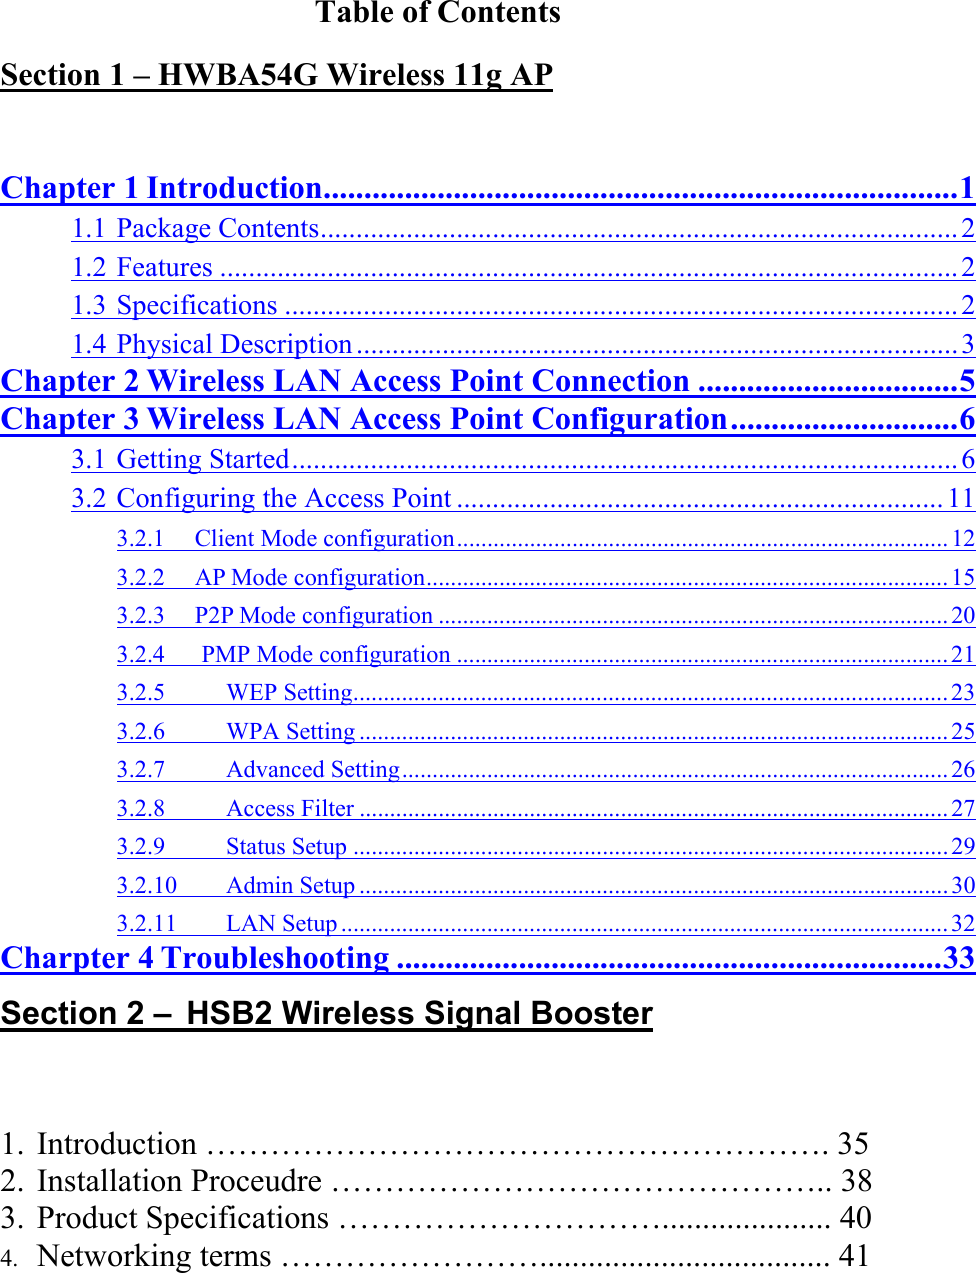 Table of Contents Section 1 – HWBA54G Wireless 11g AP  Chapter 1 Introduction..............................................................................1 1.1 Package Contents......................................................................................... 2 1.2 Features .......................................................................................................2 1.3 Specifications ..............................................................................................2 1.4 Physical Description .................................................................................... 3 Chapter 2 Wireless LAN Access Point Connection ................................5 Chapter 3 Wireless LAN Access Point Configuration............................6 3.1 Getting Started............................................................................................. 6 3.2 Configuring the Access Point .................................................................... 11 3.2.1  Client Mode configuration.................................................................................12 3.2.2  AP Mode configuration...................................................................................... 15 3.2.3  P2P Mode configuration ....................................................................................20 3.2.4   PMP Mode configuration .................................................................................21 3.2.5     WEP Setting..................................................................................................23 3.2.6     WPA Setting ................................................................................................. 25 3.2.7     Advanced Setting..........................................................................................26 3.2.8     Access Filter ................................................................................................. 27 3.2.9     Status Setup ..................................................................................................29 3.2.10    Admin Setup ................................................................................................. 30 3.2.11    LAN Setup .................................................................................................... 32 Charpter 4 Troubleshooting ...................................................................33 Section 2 – HSB2 Wireless Signal Booster 1. Introduction …………………………………………………. 35        2. Installation Proceudre ……………………………………….. 38 3. Product Specifications …………………………..................... 40 4. Networking terms …………………….................................... 41  